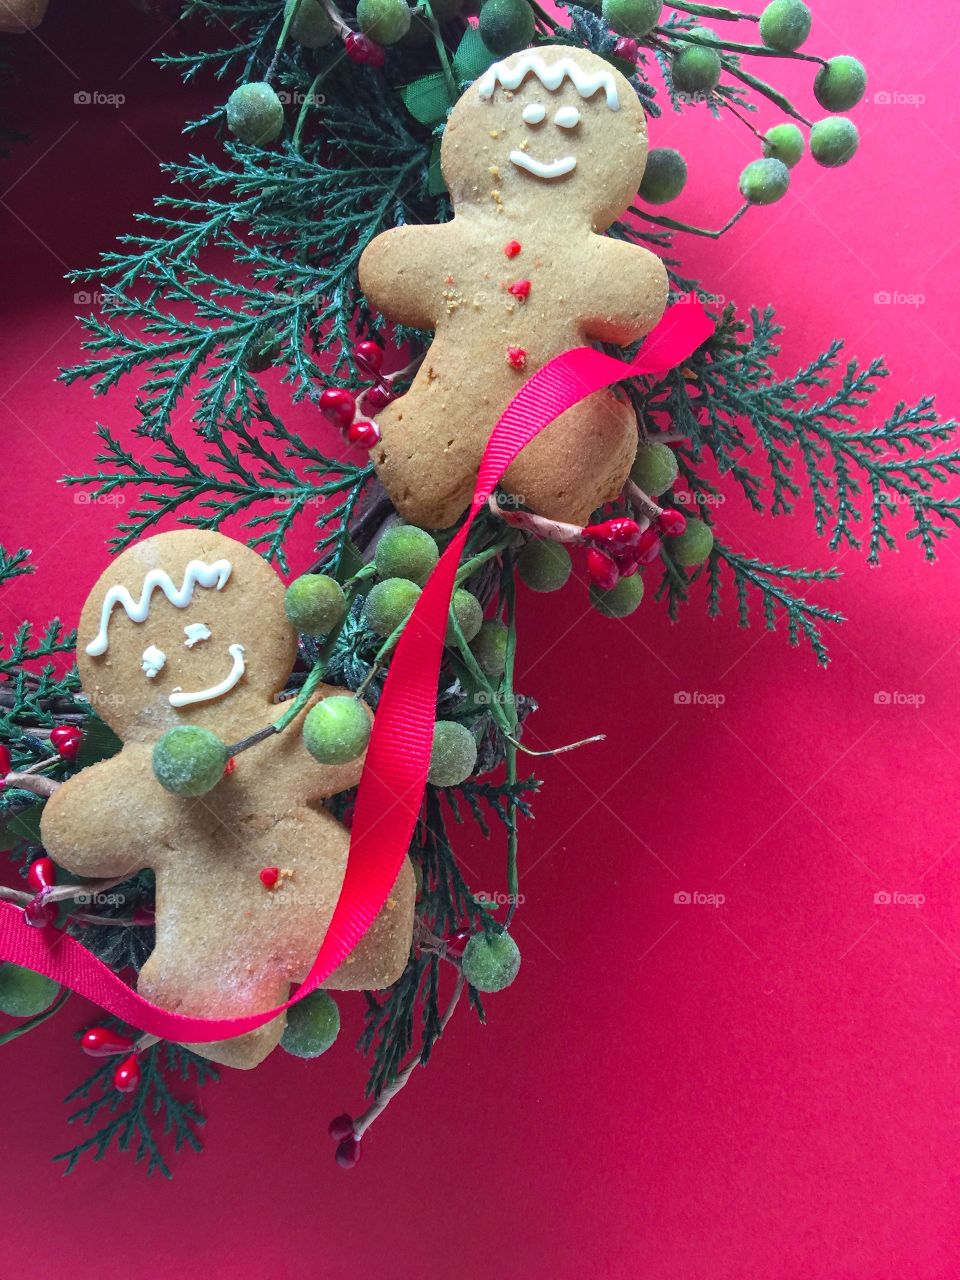 Gingerbread men on wreath with copy space